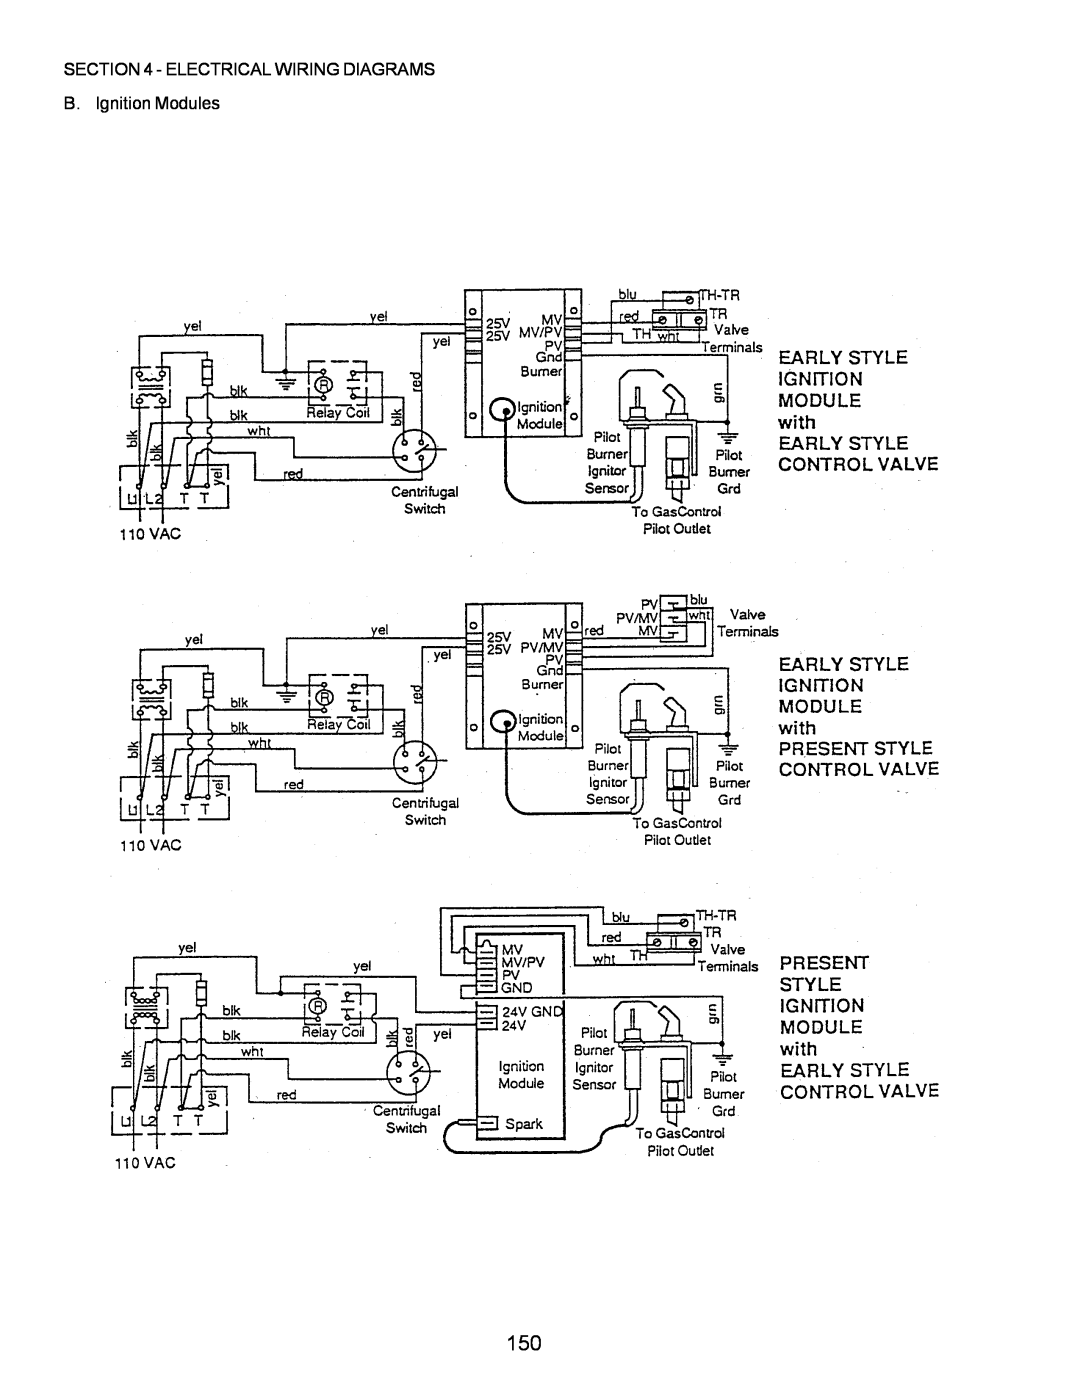 Middleby Marshall PS360, PS570, PS200, PS555, PS220, PS224 PS310 manual ELECTRICAL WIRING DIAGRAMS B. Ignition Modules 